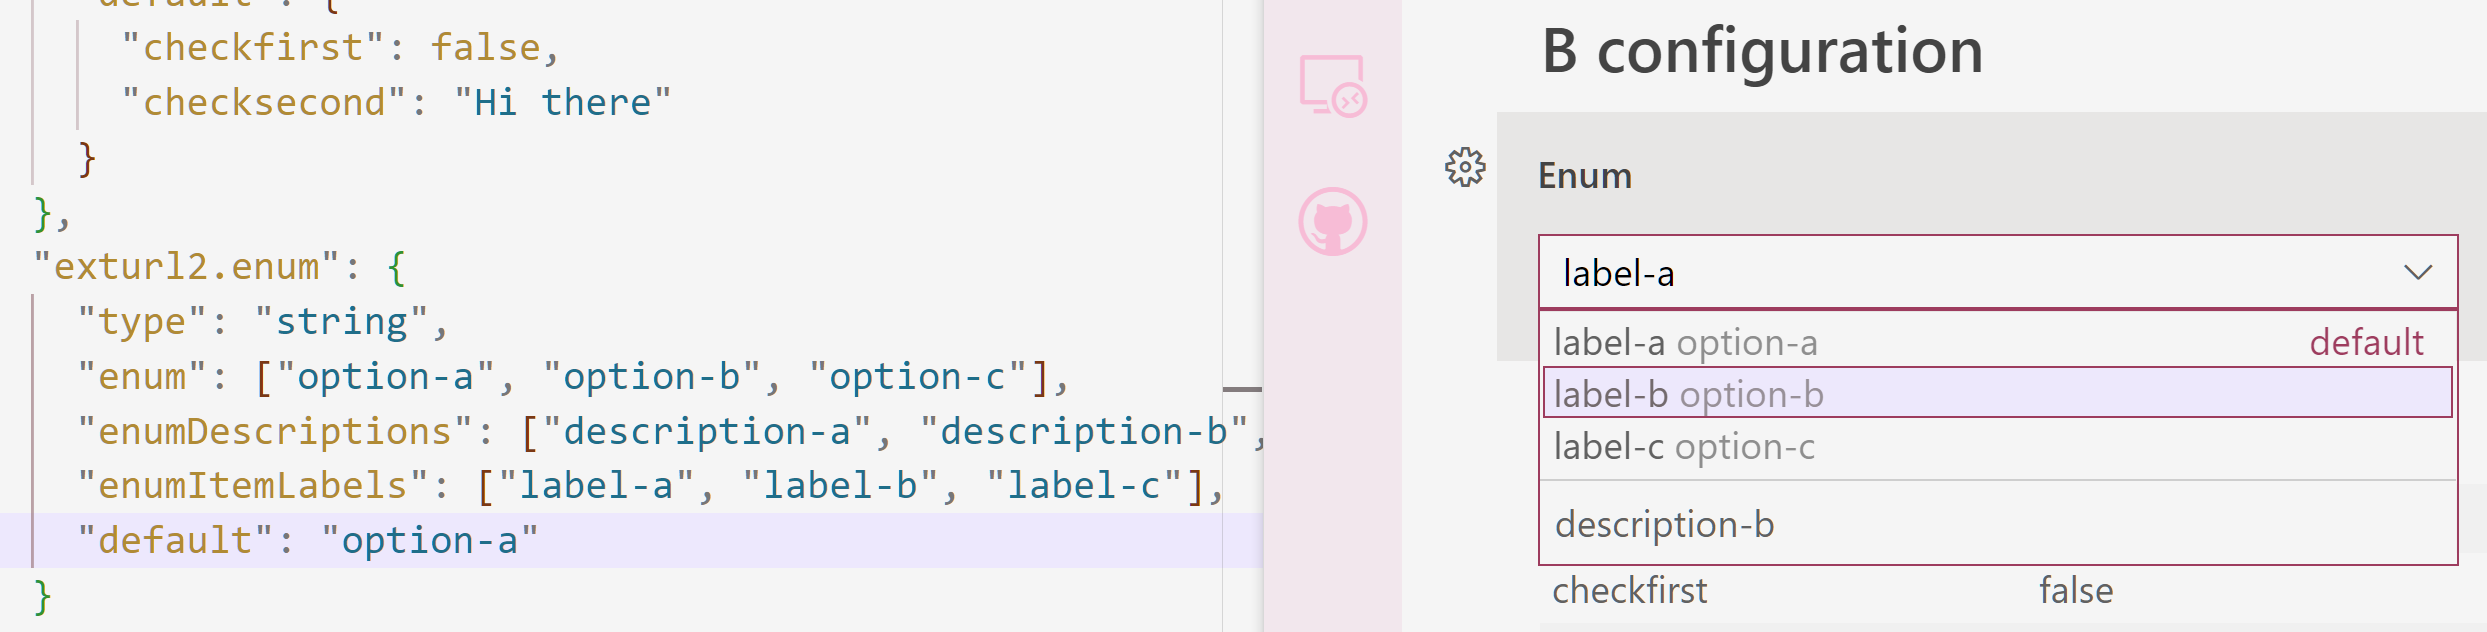 Example of enumItemLabels with a mock setting. The select box displays the label value, and the dropdown options display both the label value and the enum value, though the enum values are rendered less prominently.